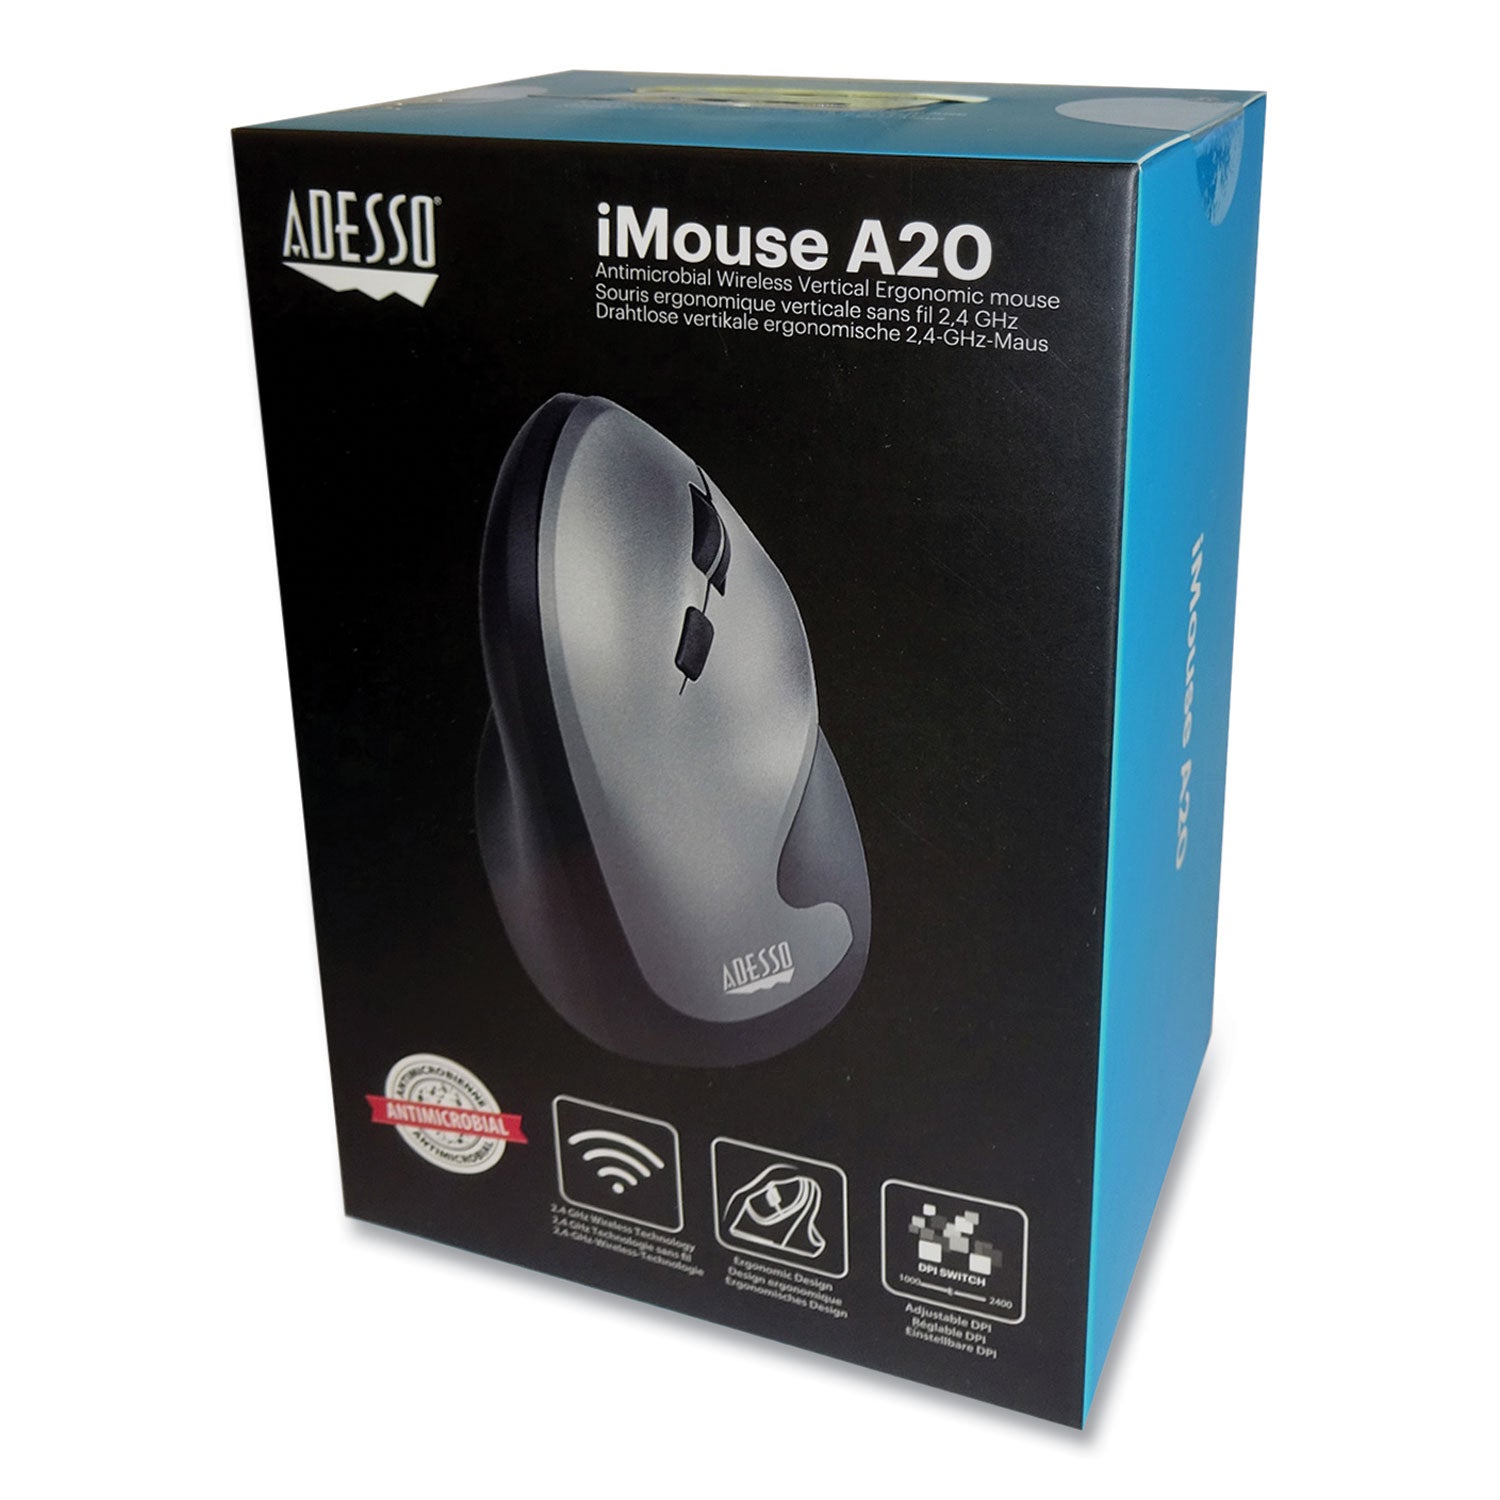 imouse-a20-antimicrobial-vertical-wireless-mouse-24-ghz-frequency-33-ft-wireless-range-right-hand-use-black-granite_adea20 - 1